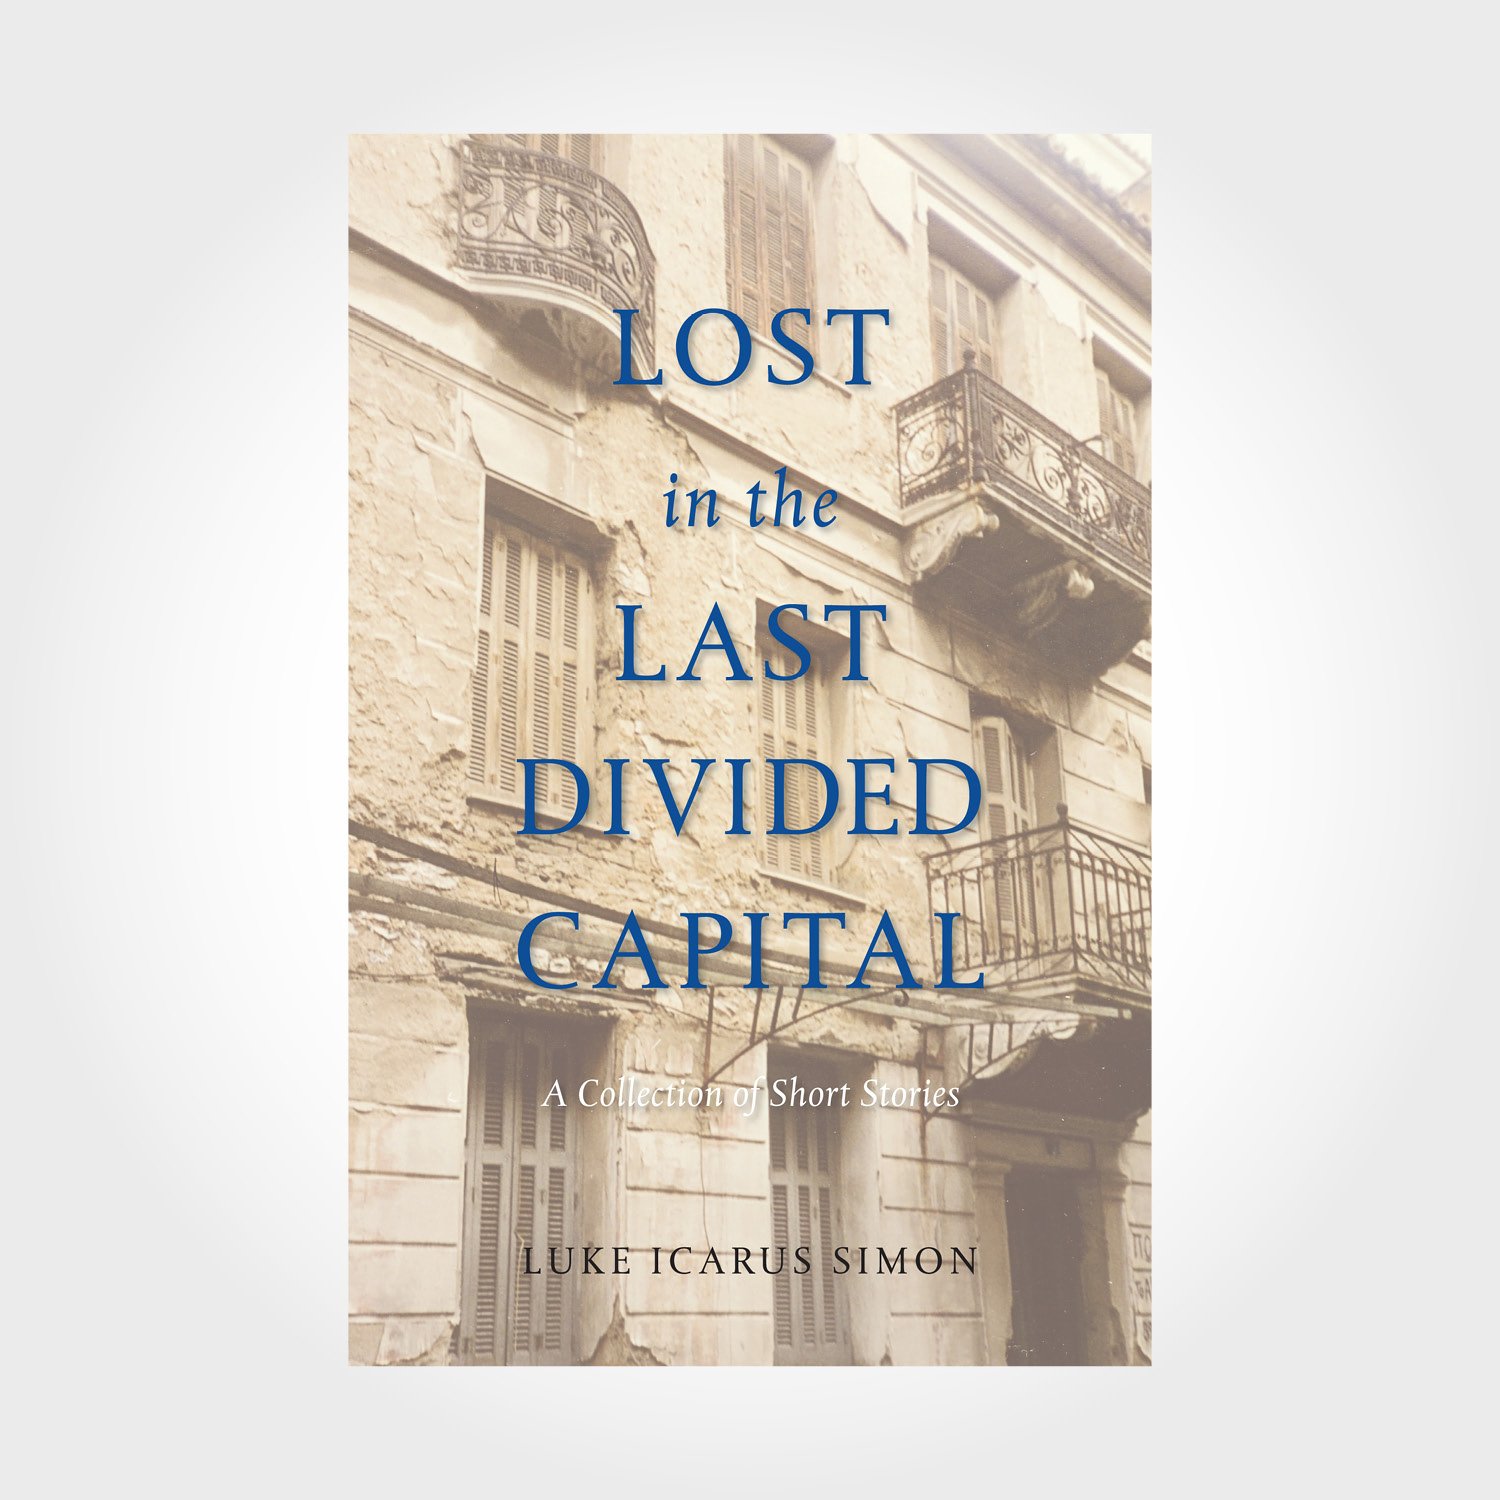 Lost in the Last Divided Capital